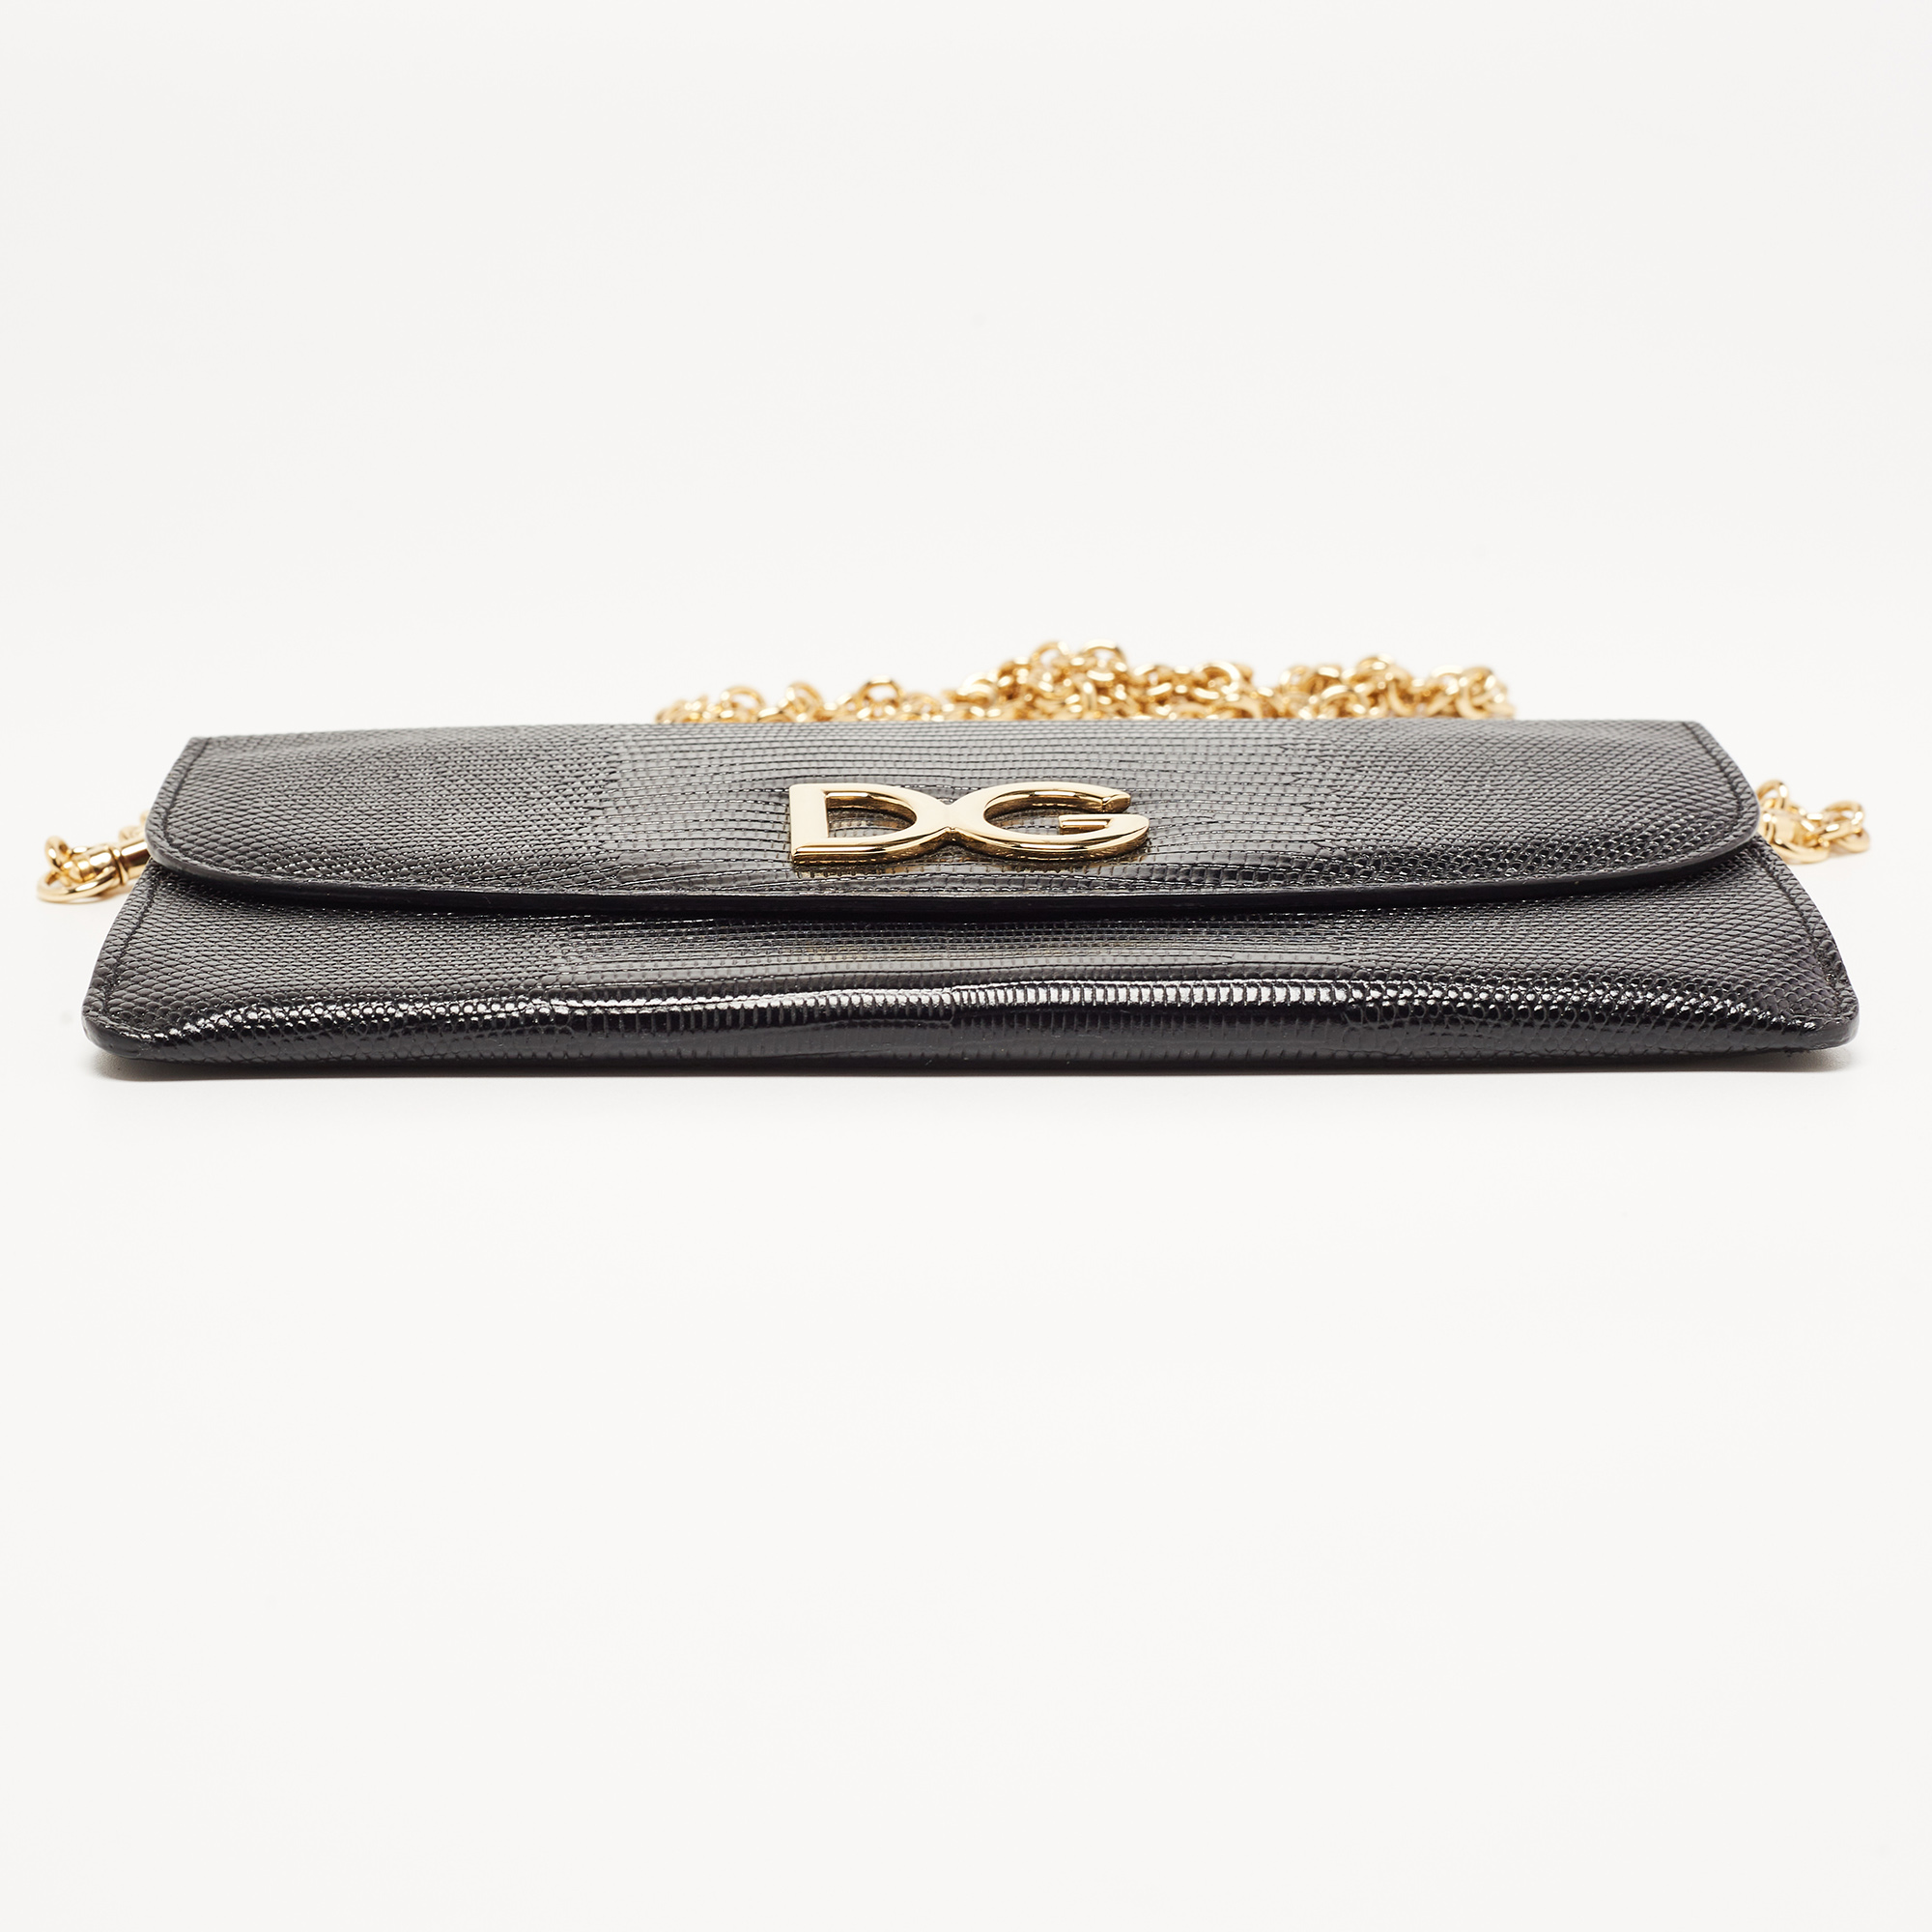 D&G Black Lizard Embossed Leather Flap Chain Clutch